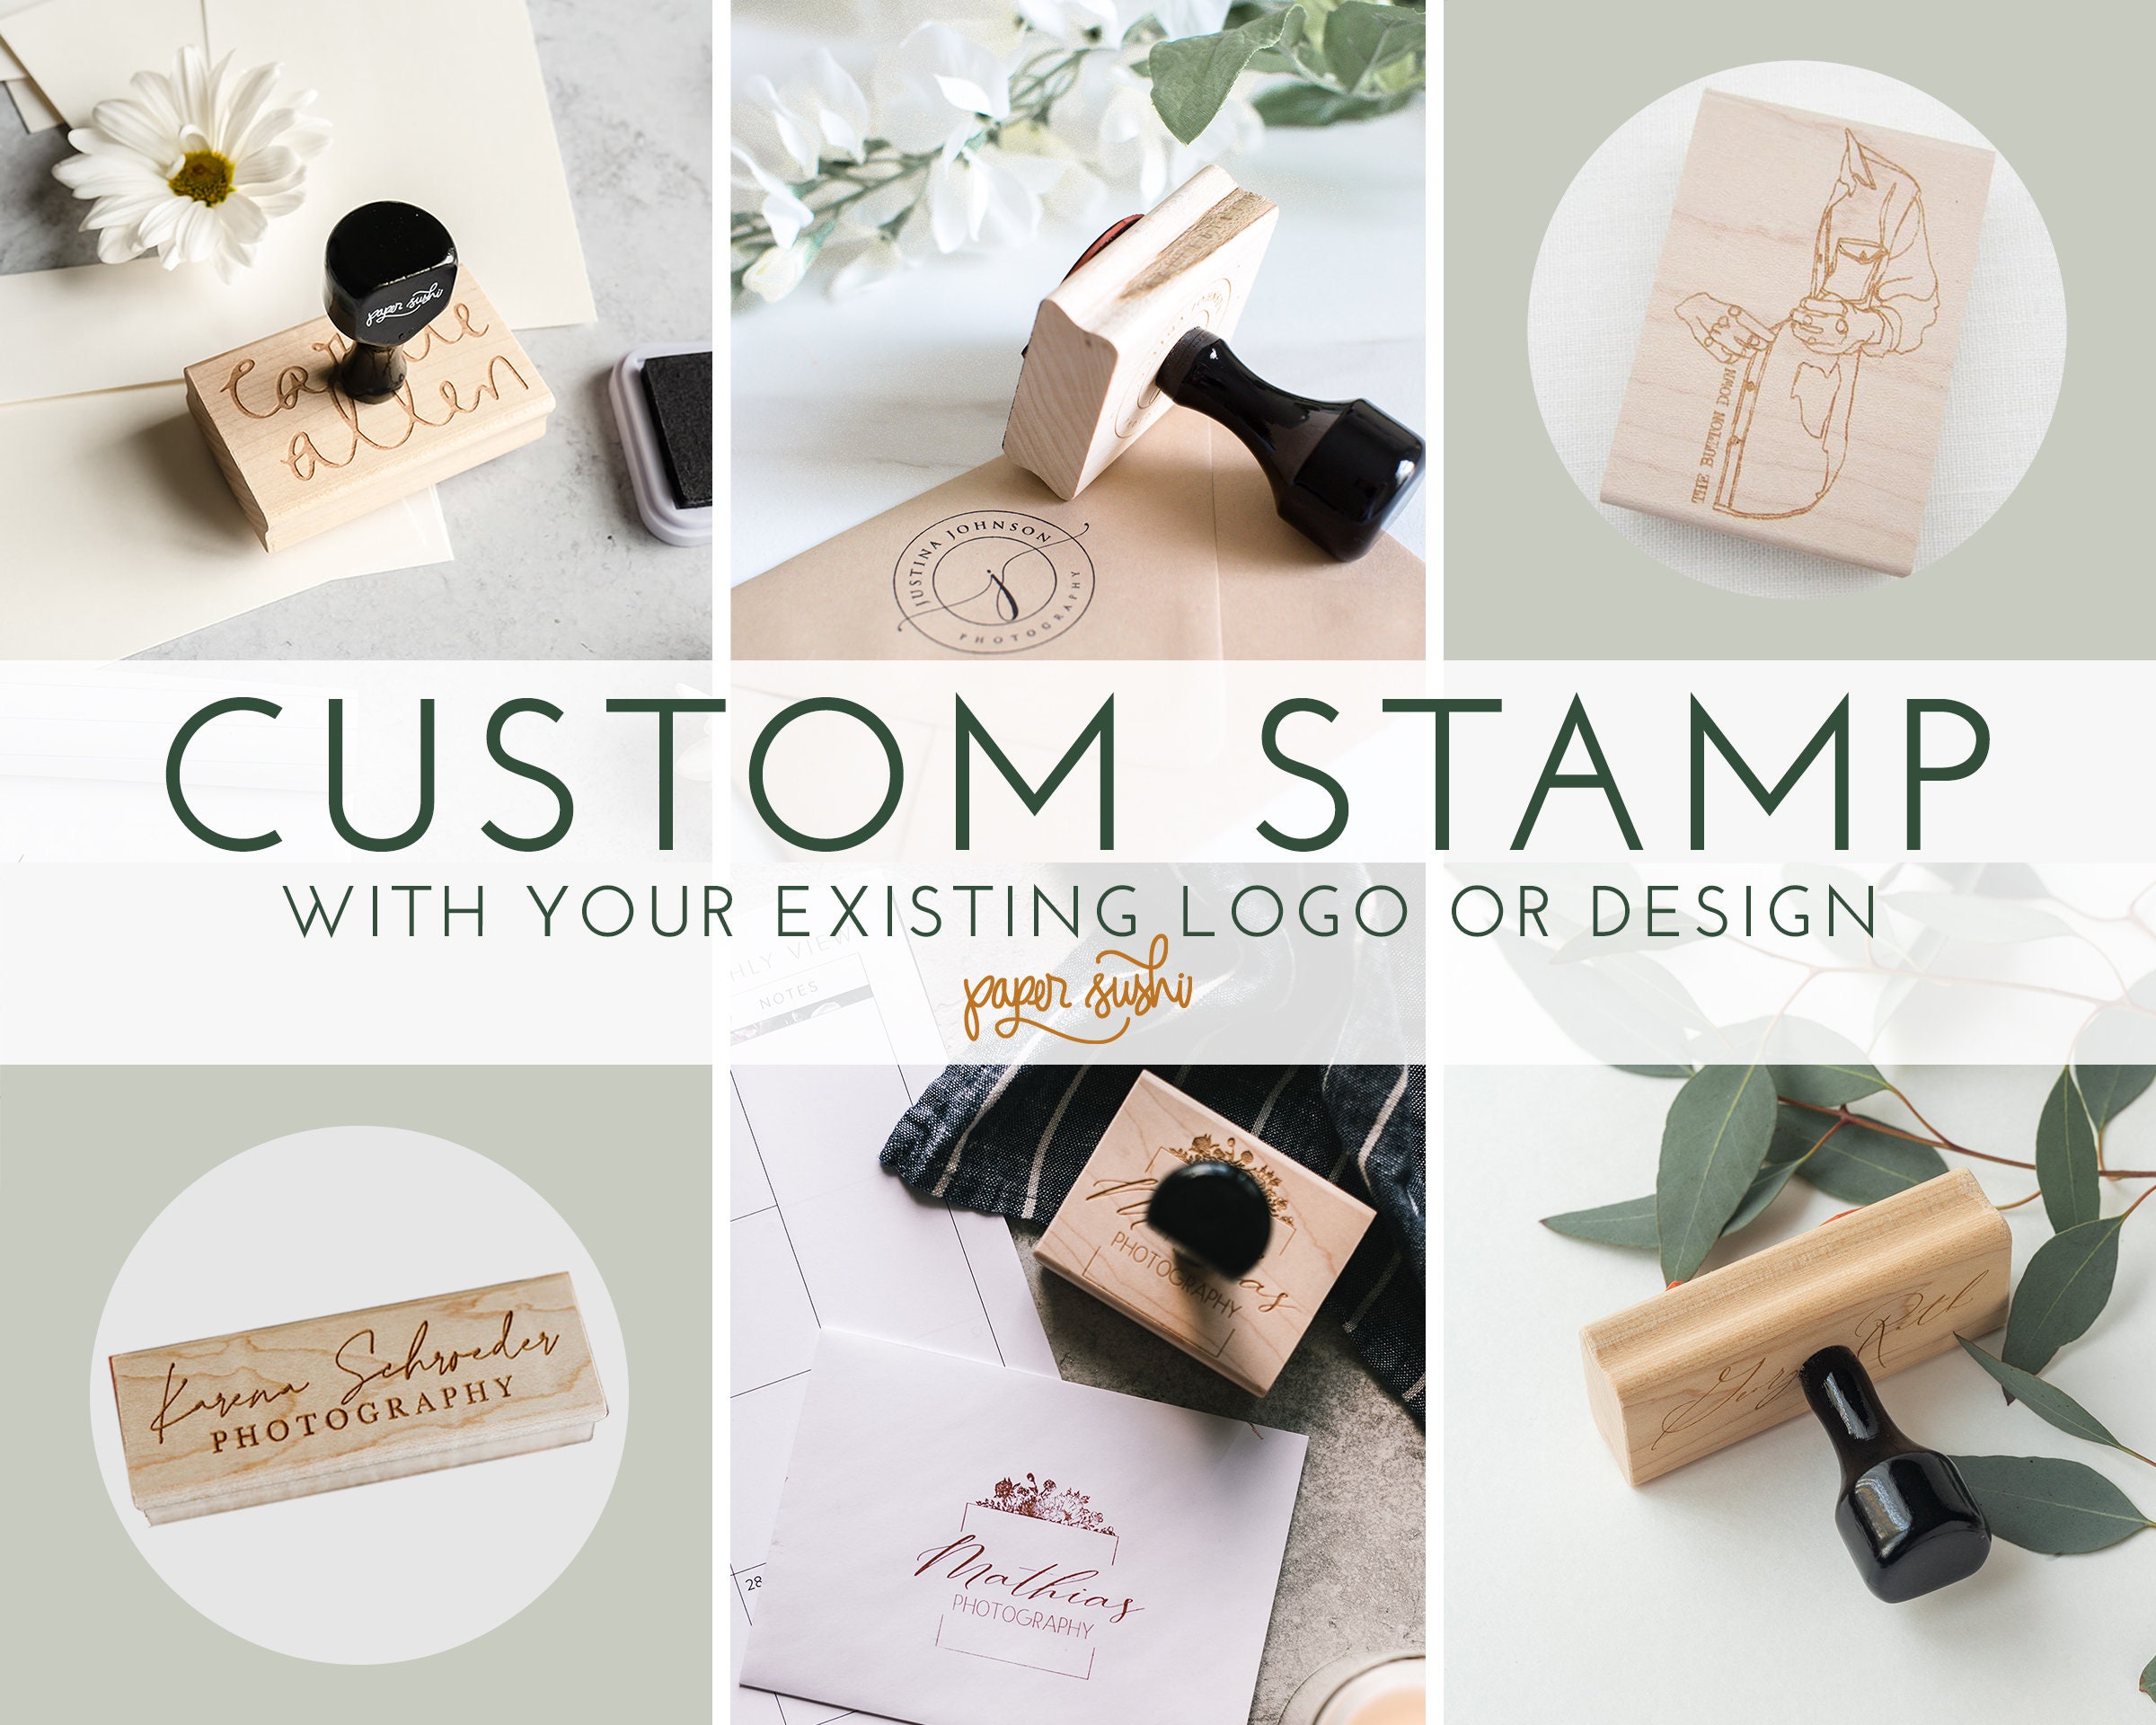 Custom Logo Stamp for Large Boxes and Bags, Stamp for Envelope